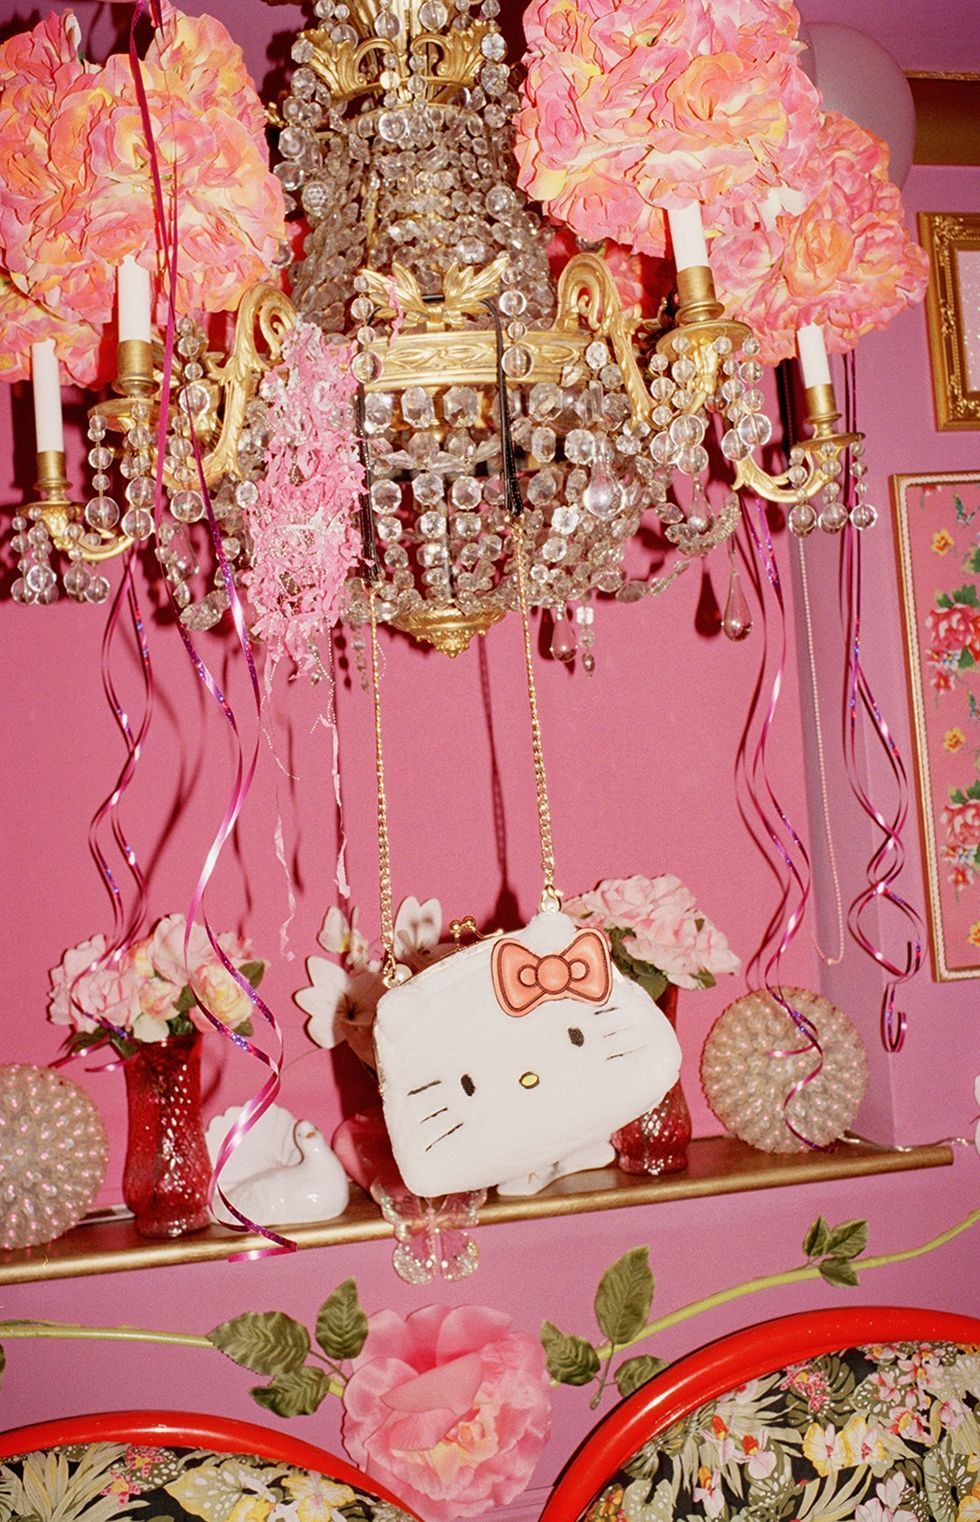 Pink, Room, Decoration, Party, Chandelier, Lighting accessory, Baby shower, Sweetness, Interior design, Lampshade, 